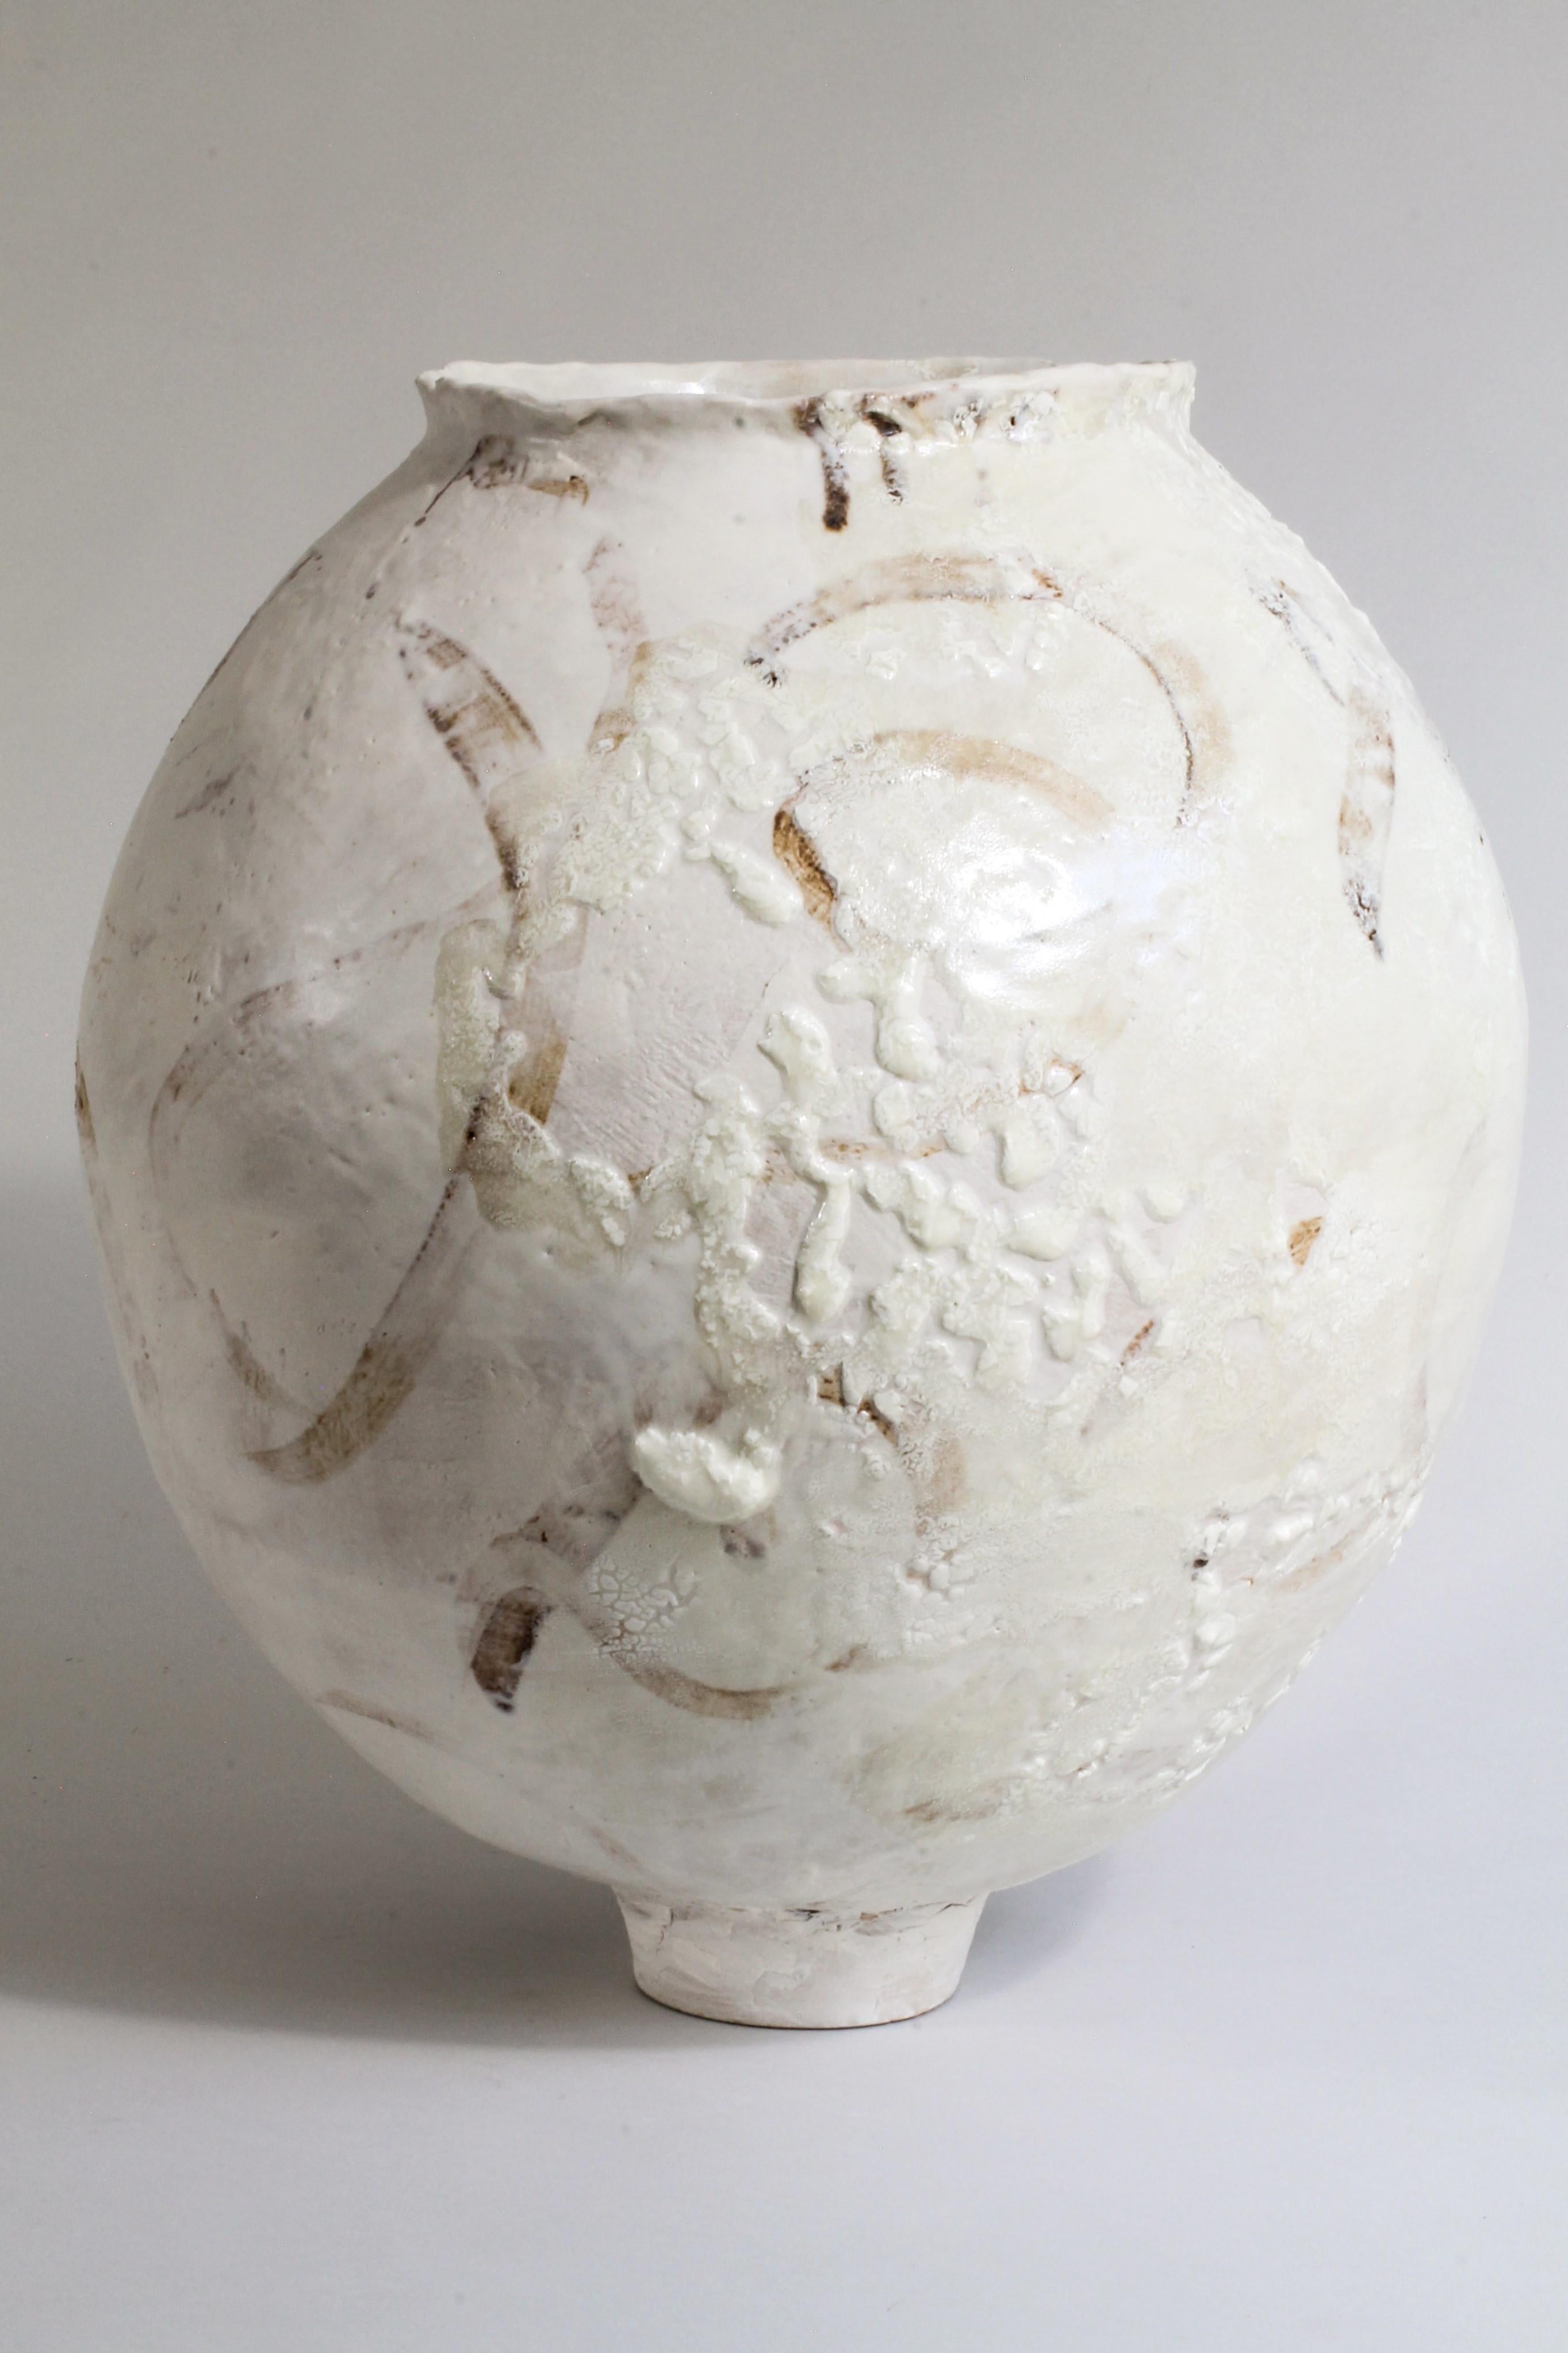 Based on the tradtional Moon jar, this piece has been hand built by Kerry Hastings using the ancient technique of coiling with ropes of clay.  The jar is glazed in a white satin glaze with brushed swirls of manganese and a textured lichen glaze on